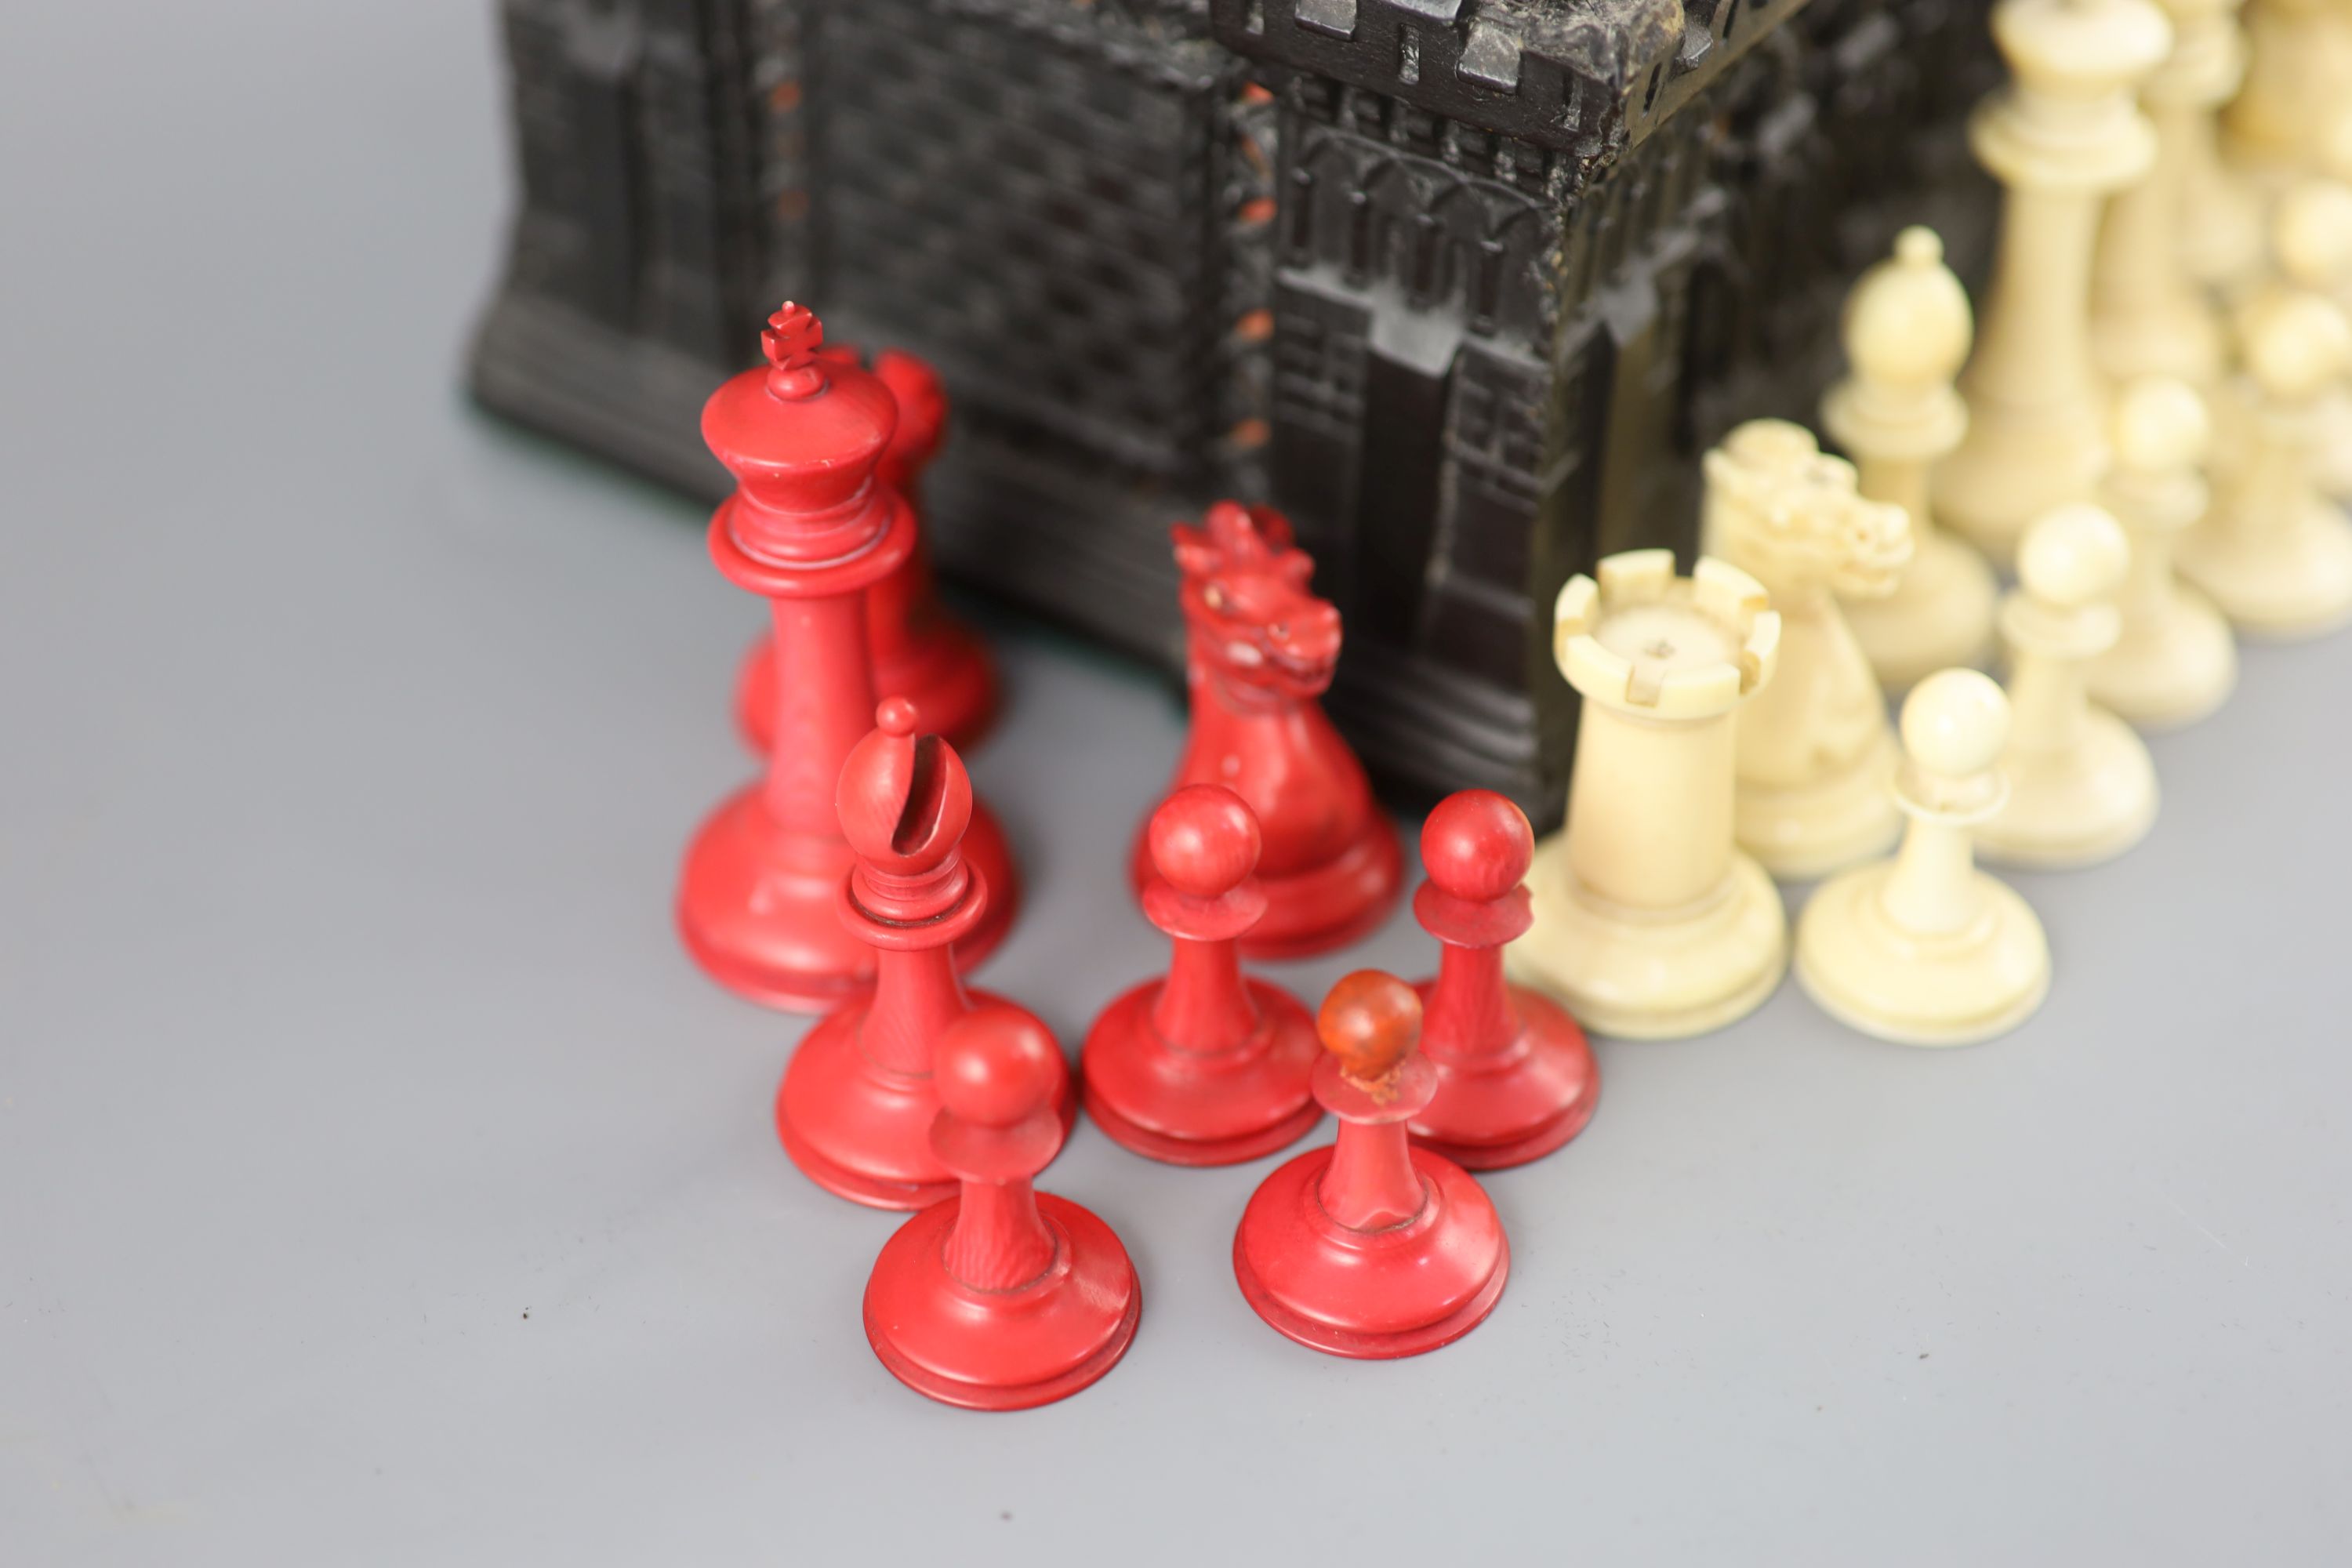 A Jaques London red and white ivory 2¾ Staunton chess set, c.1850, 8.25 x 6 x 4in.